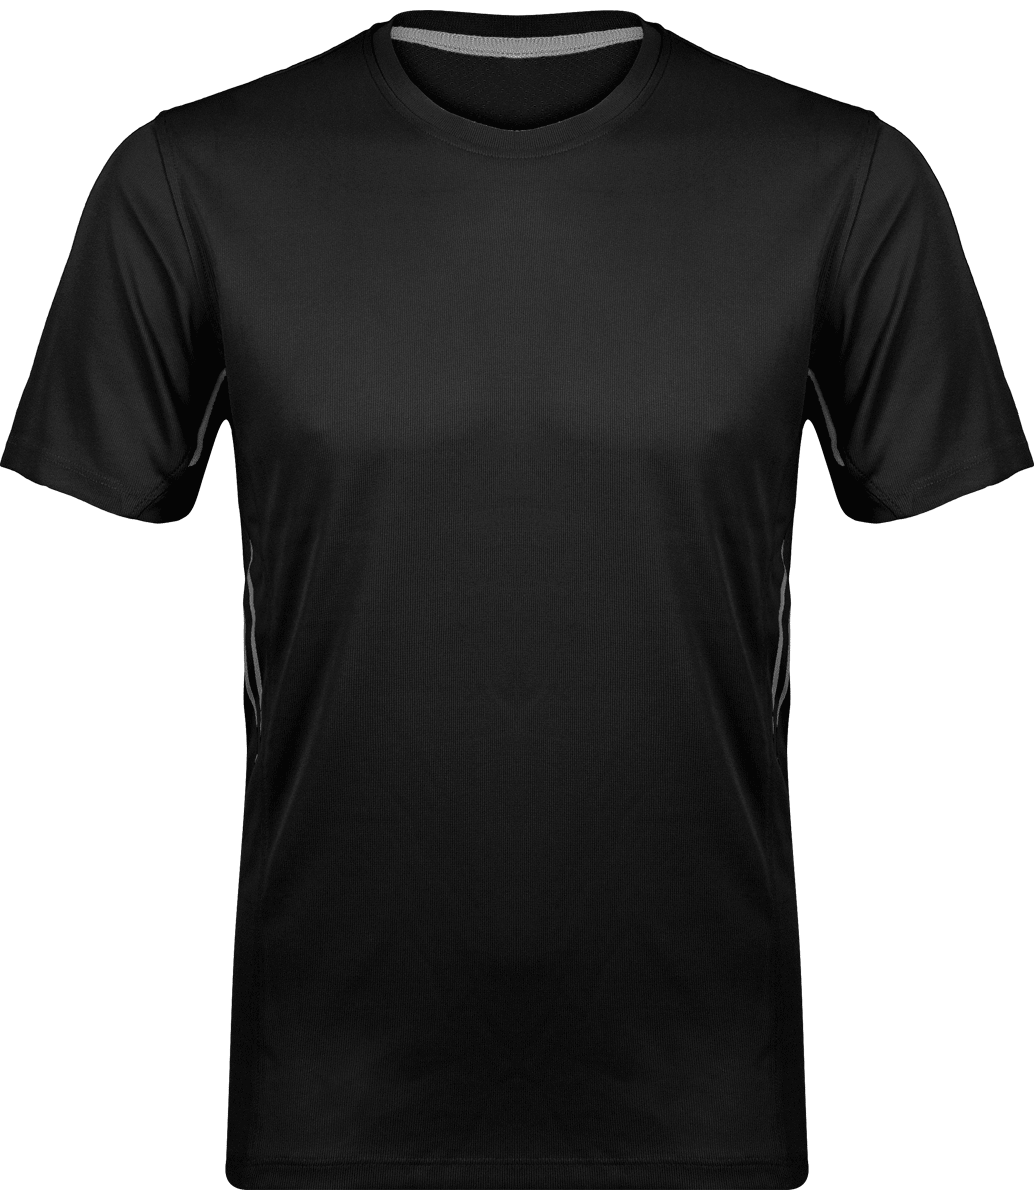 Men's Sports T-Shirt | Light And Breathable | Embroidery & Flex Black / Silver